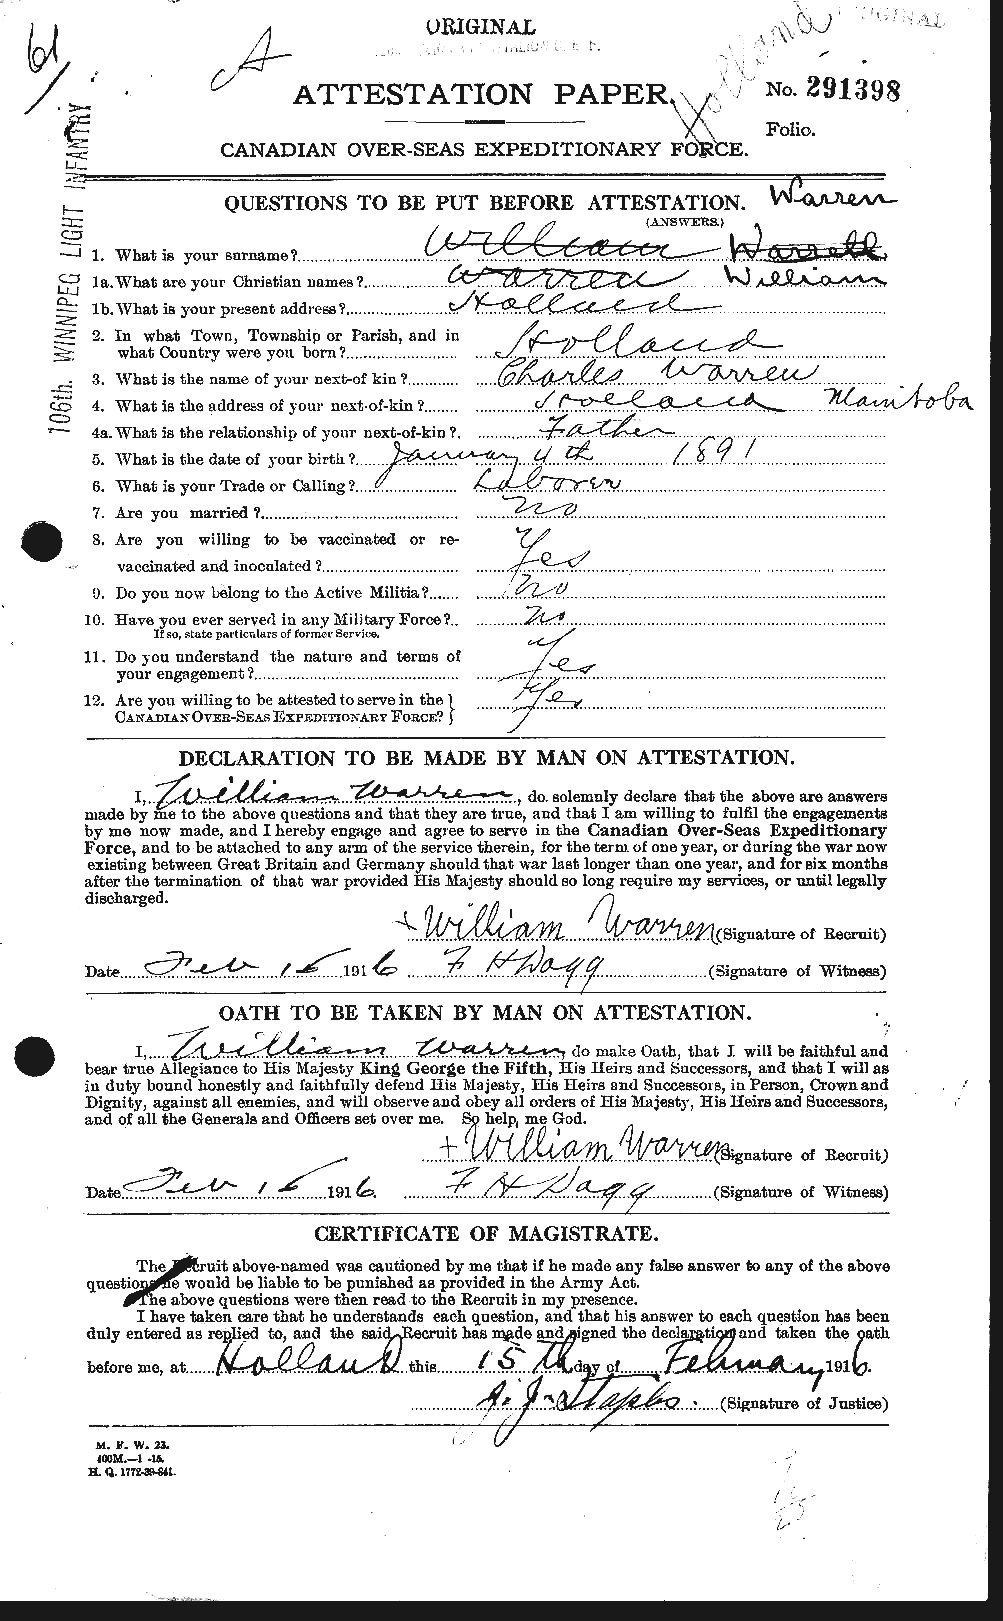 Personnel Records of the First World War - CEF 658674a